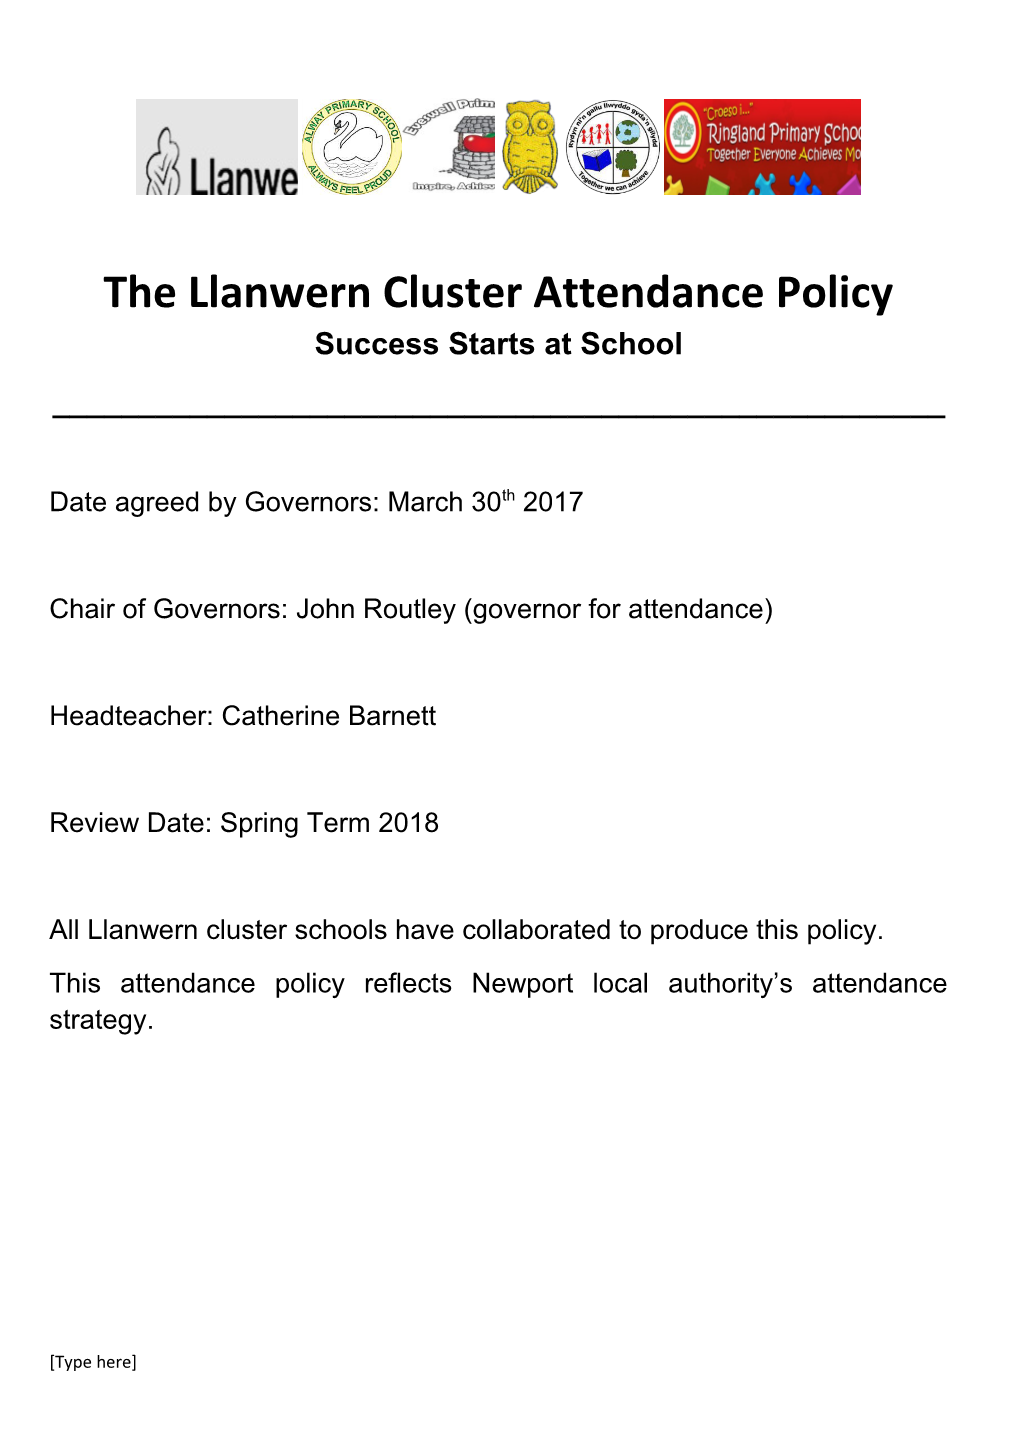 The Llanwern Cluster Attendance Policy Success Starts at School